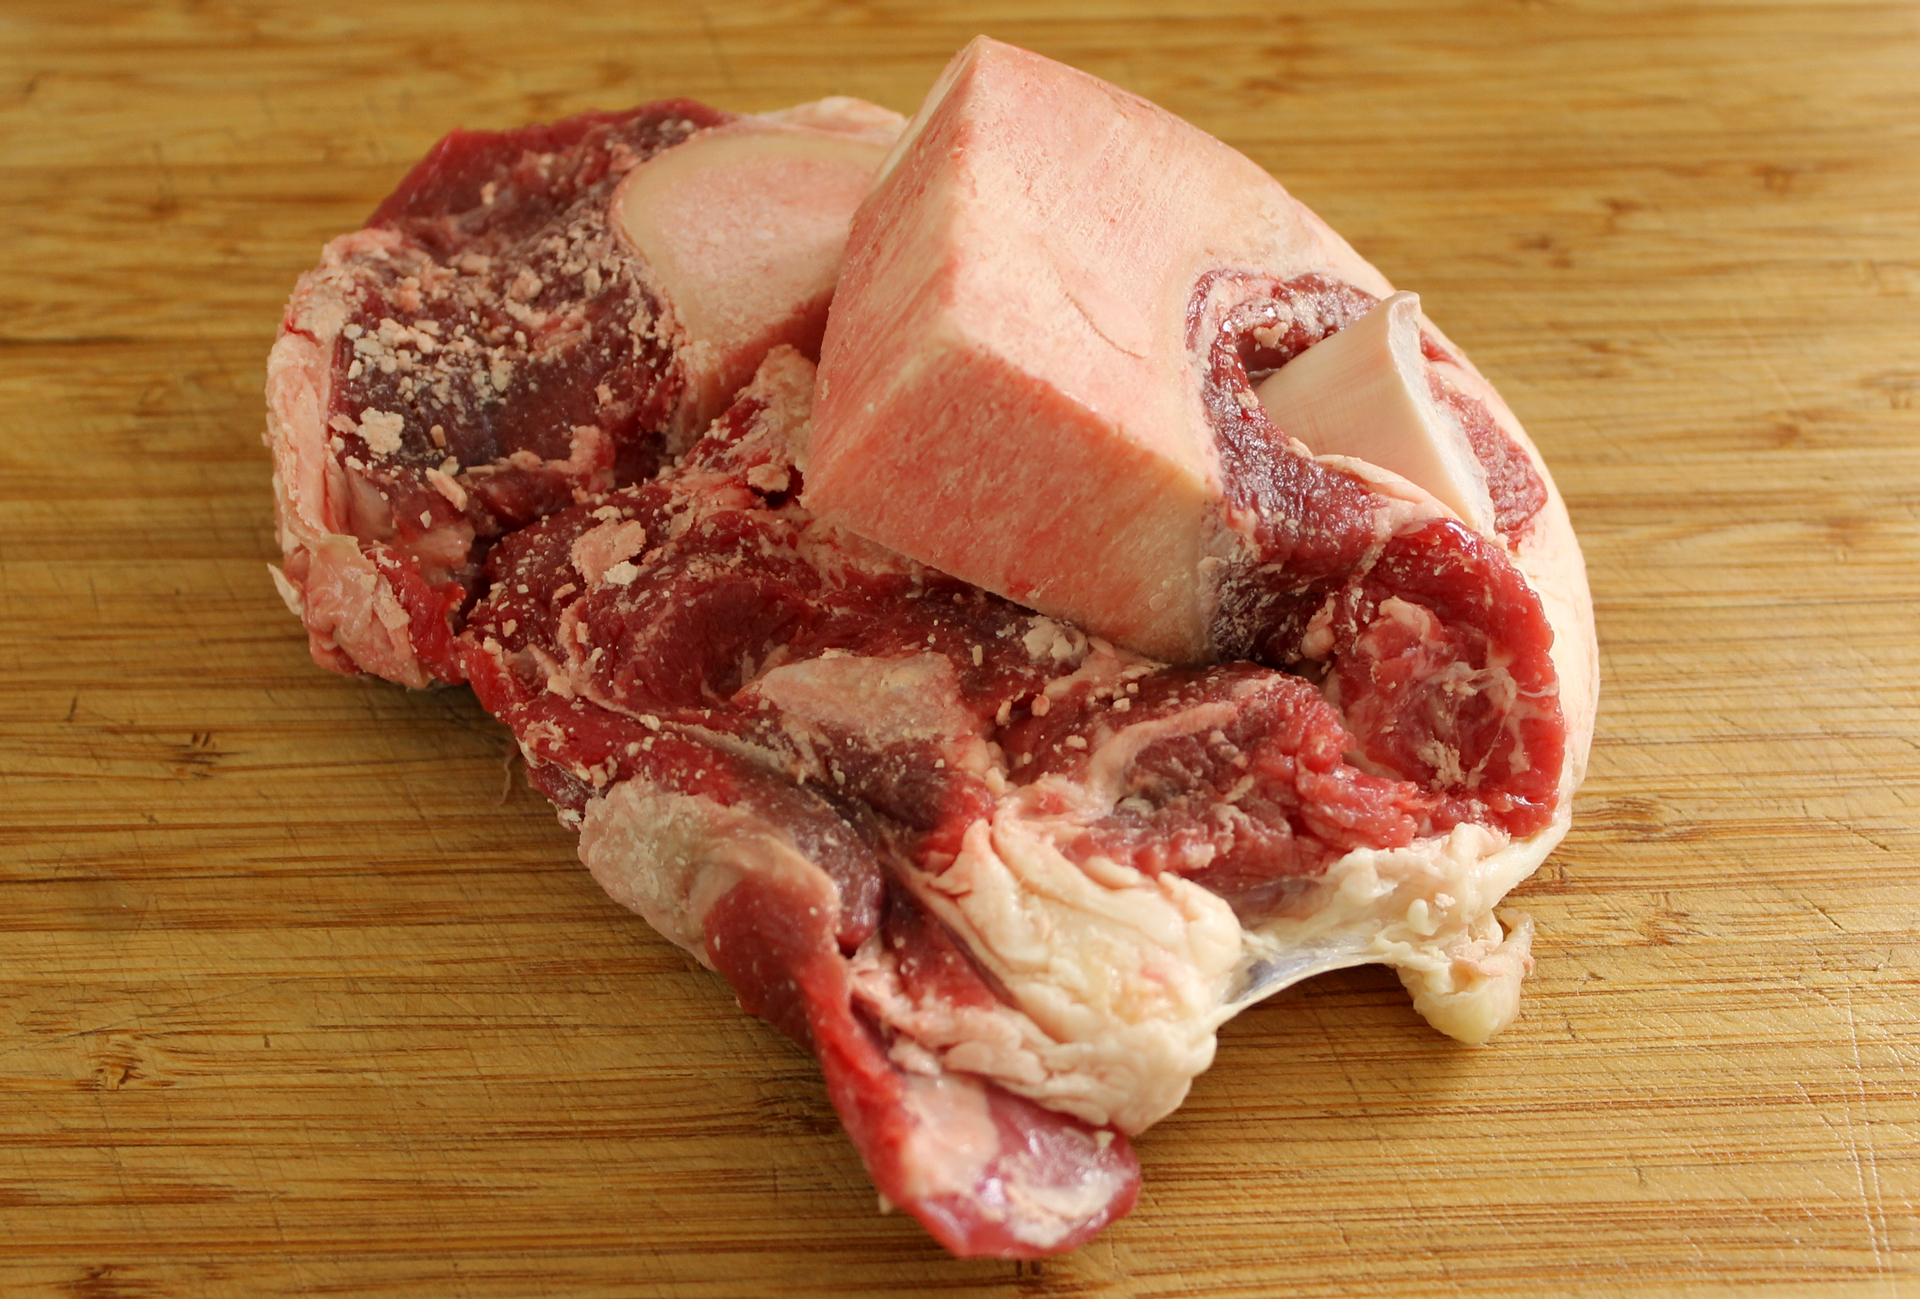 Beef knuckle bones make good stock because they offer a good mix of meat, bone, marrow and connective tissue.